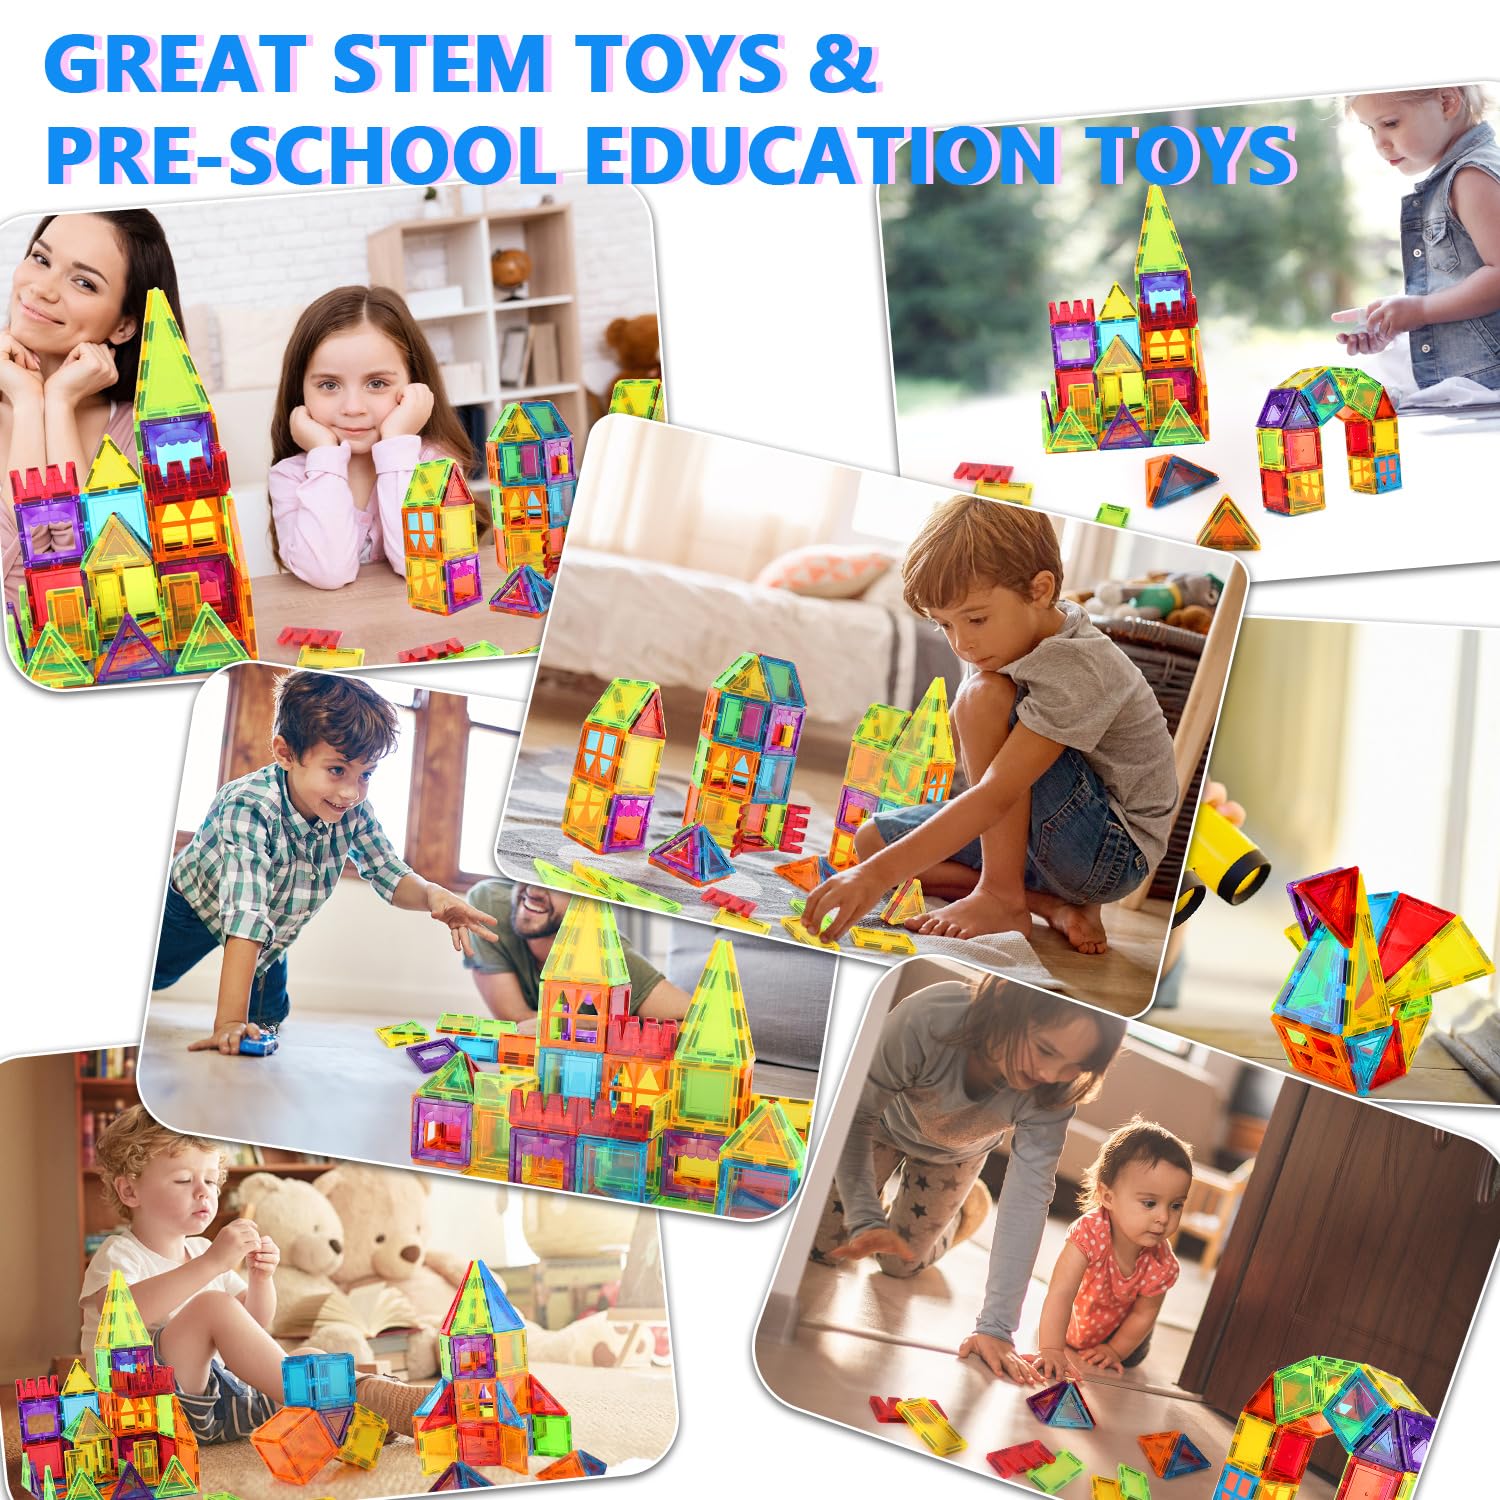 MAGDIY Magnetic Tiles Toys Games for Kids, STEM Magnetic Blocks Sensory Toys for Toddler, Magnet Building Toys for Kids Ages 3-5 4-8, Learning Educational Autism Toys for 3+ Year Old Boys and Girls